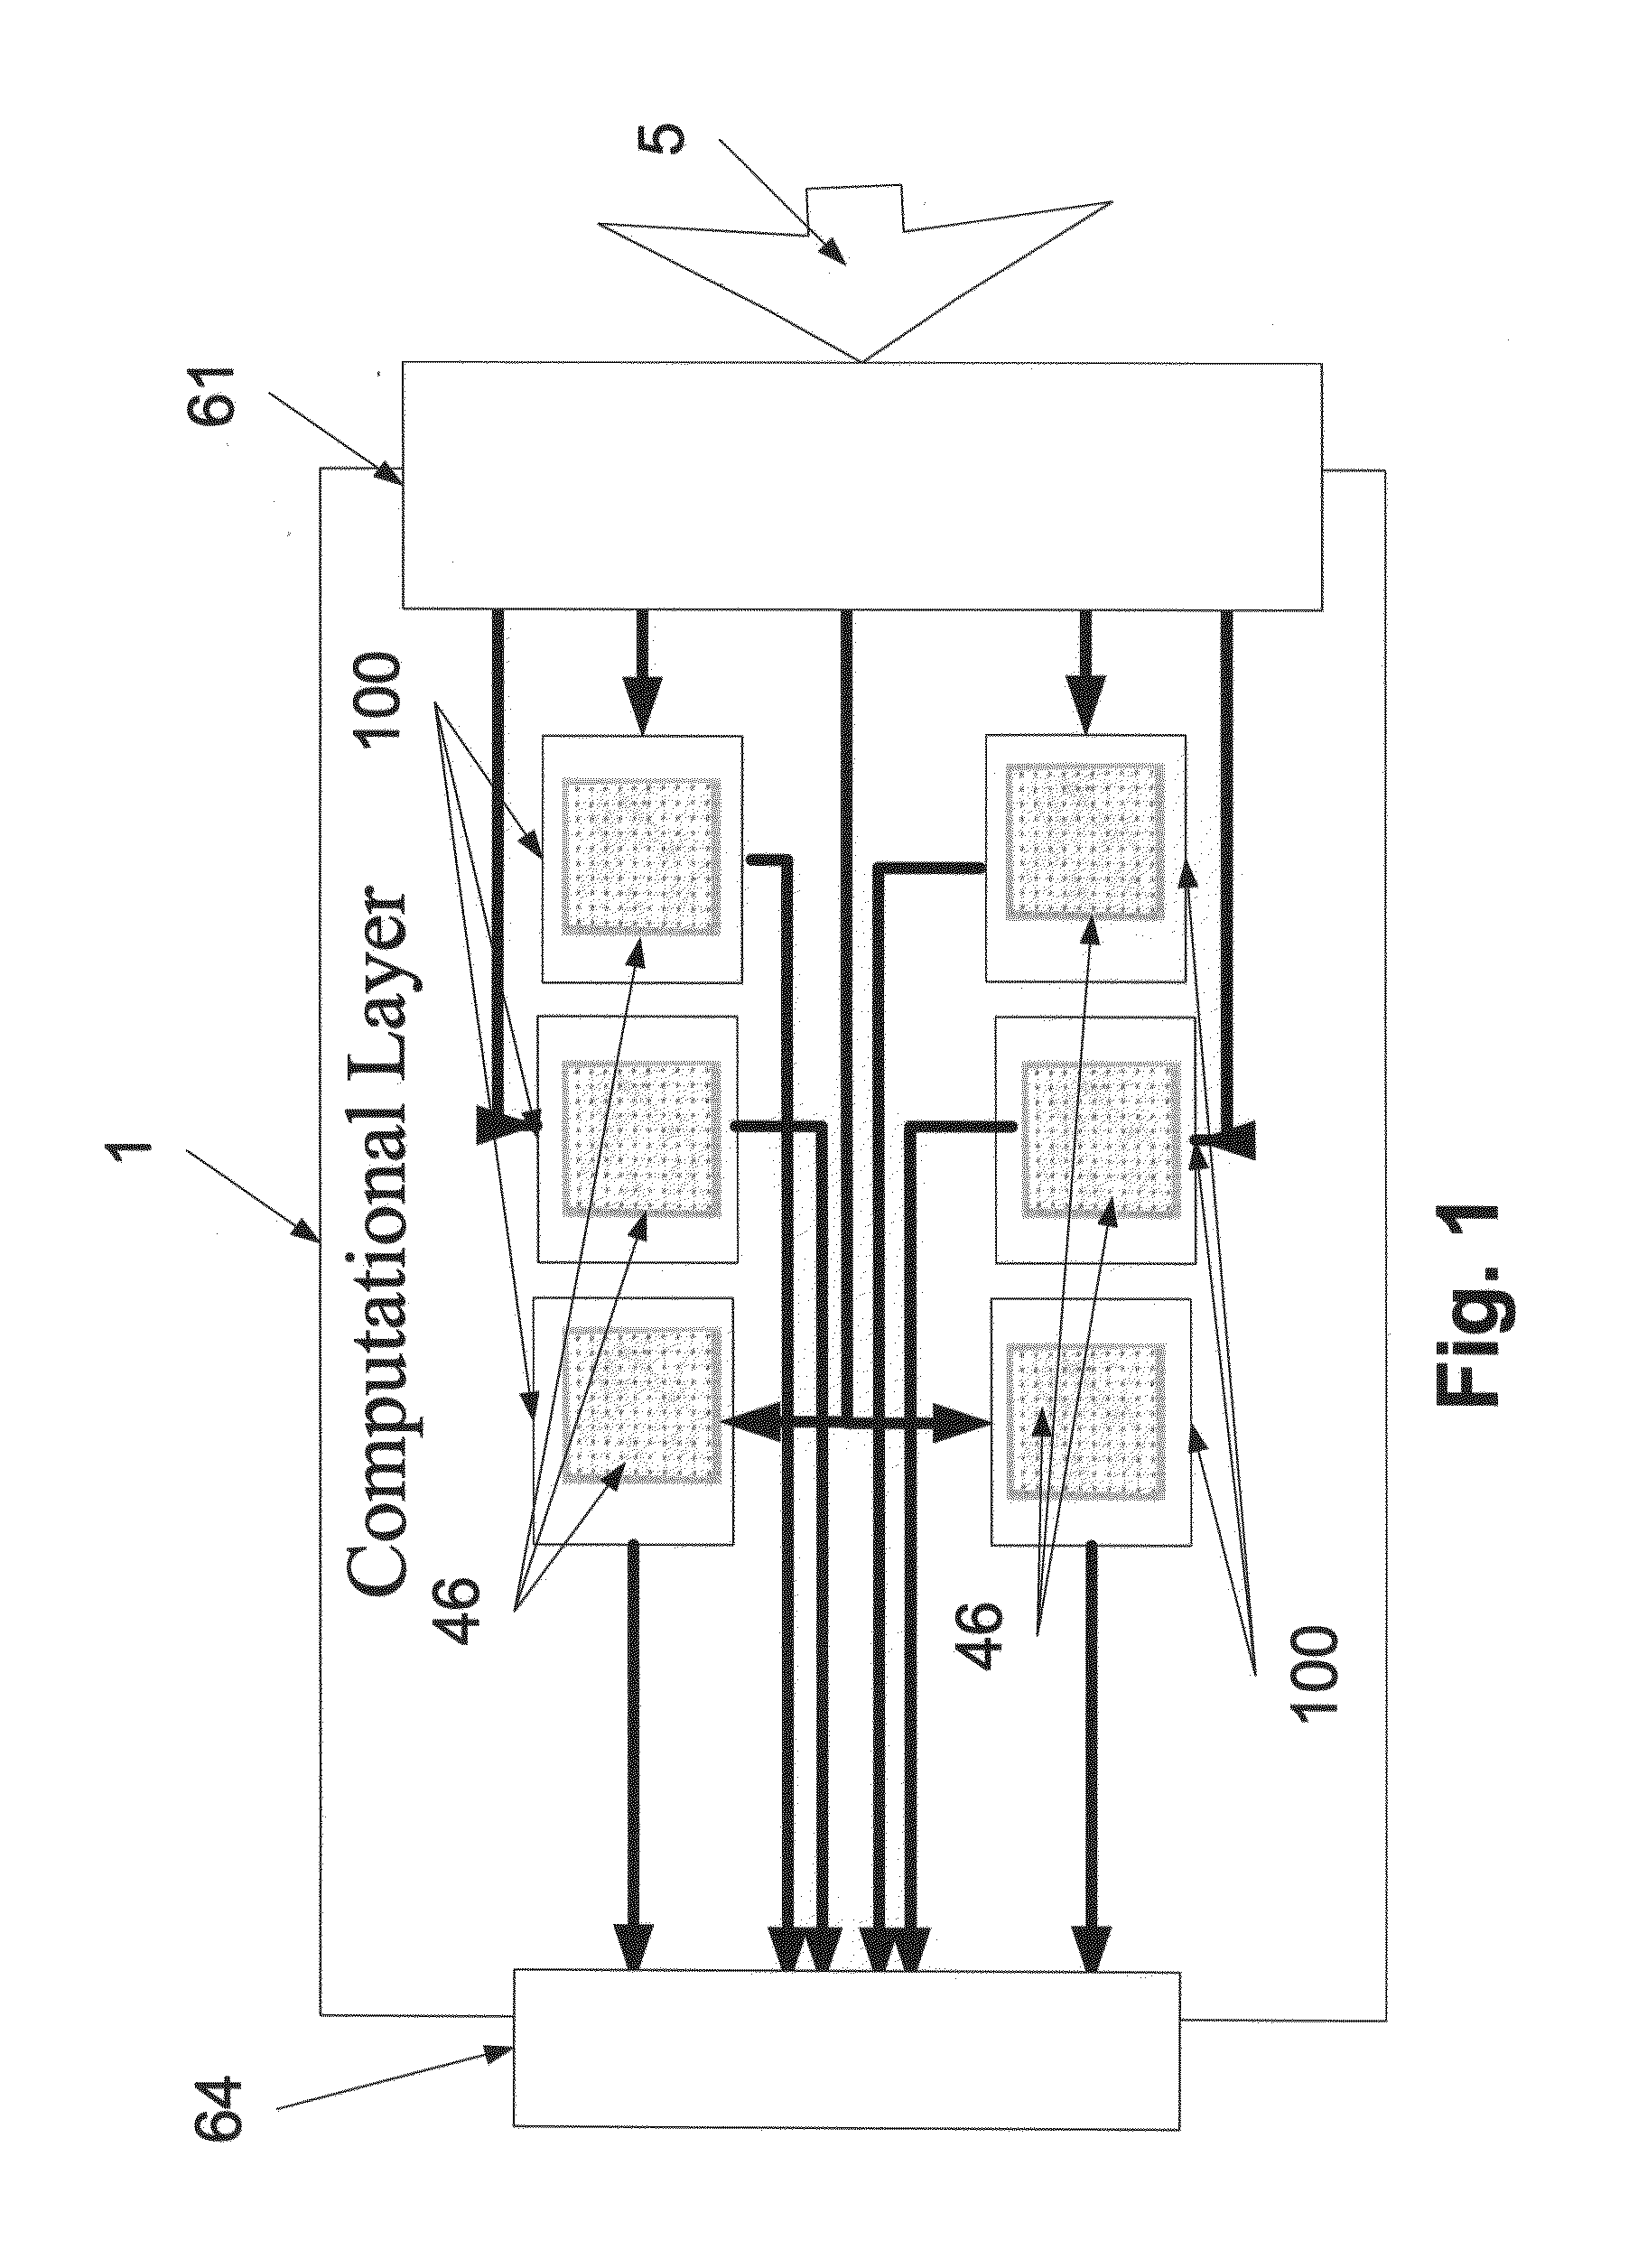 Computing device, a system and a method for parallel processing of data streams